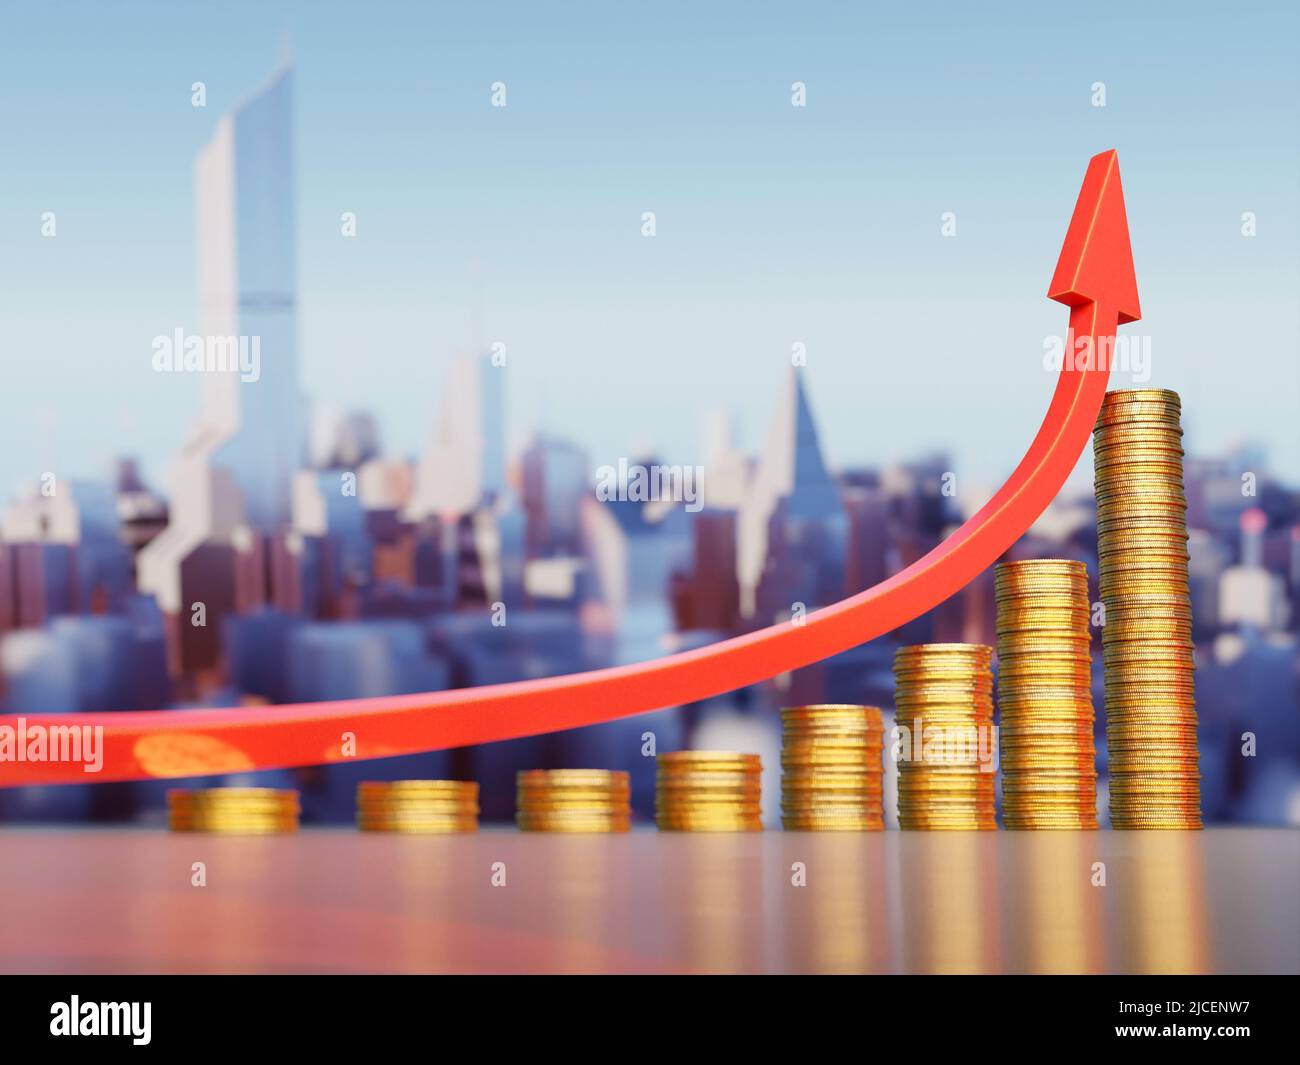 Inflation, prices rise concept. Coin stacks and red arrows representing the increase in the cost of living. Digital 3D rendering. Stock Photo